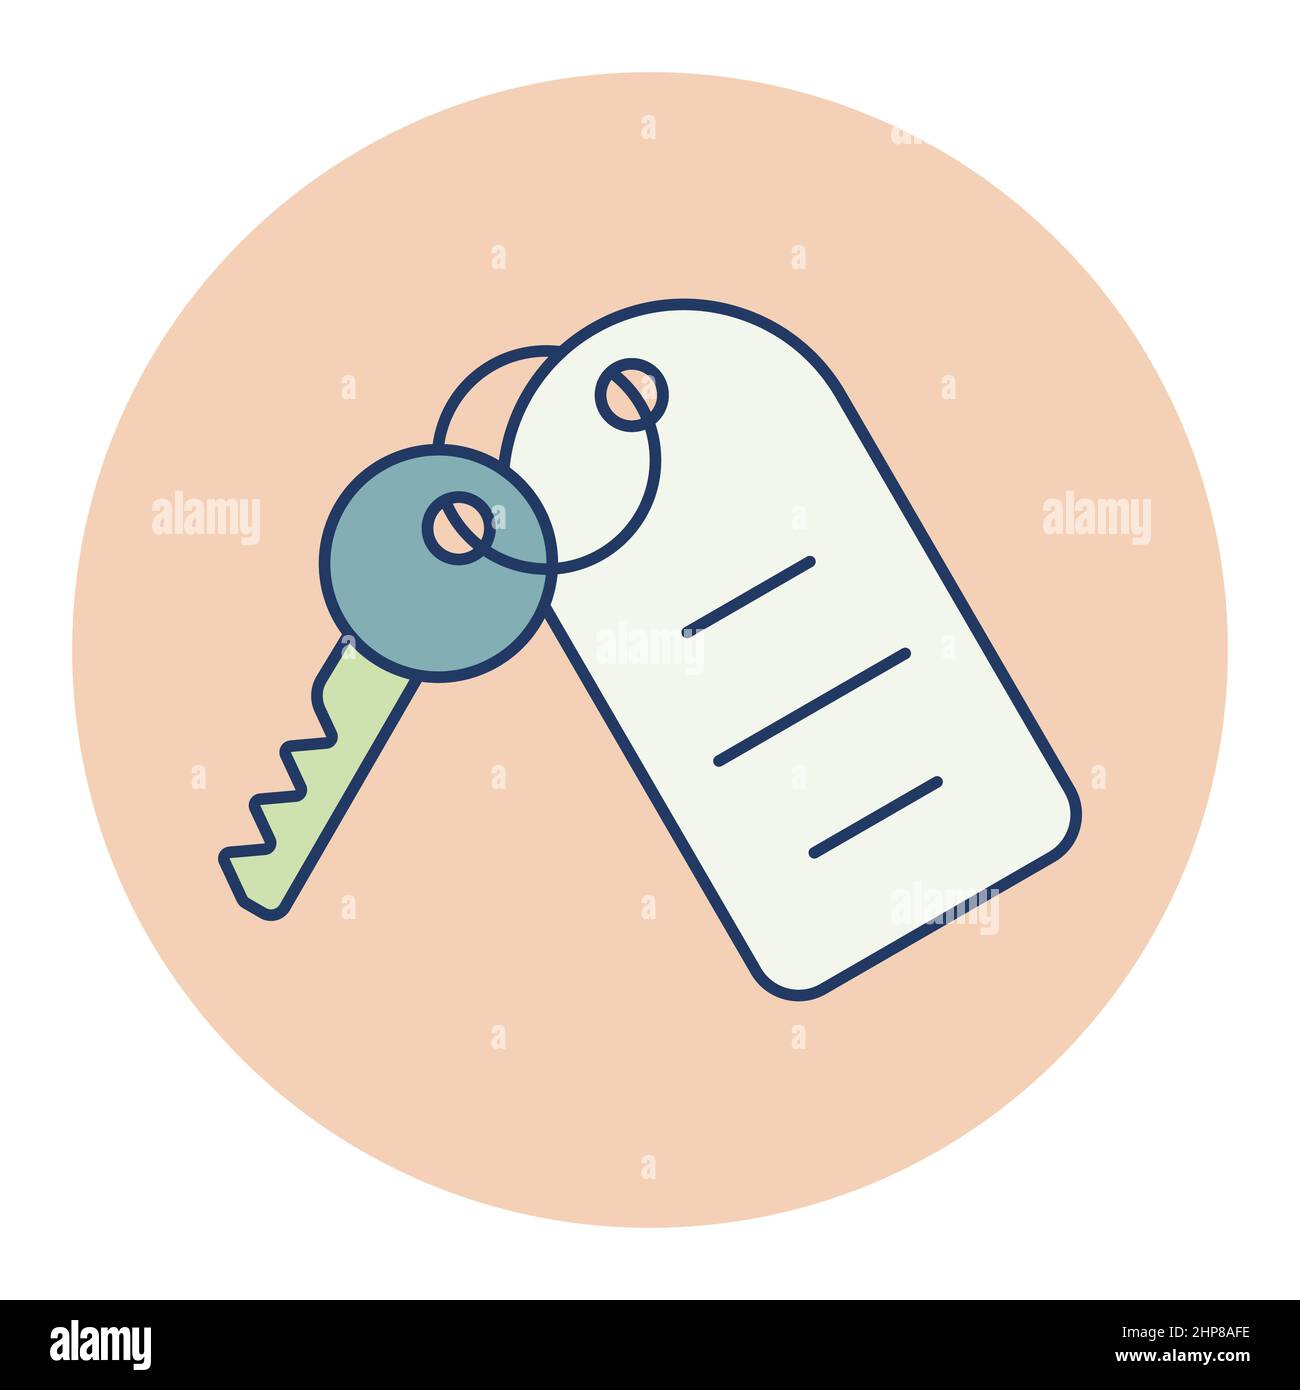 Hotel room key with number vector icon Stock Vector